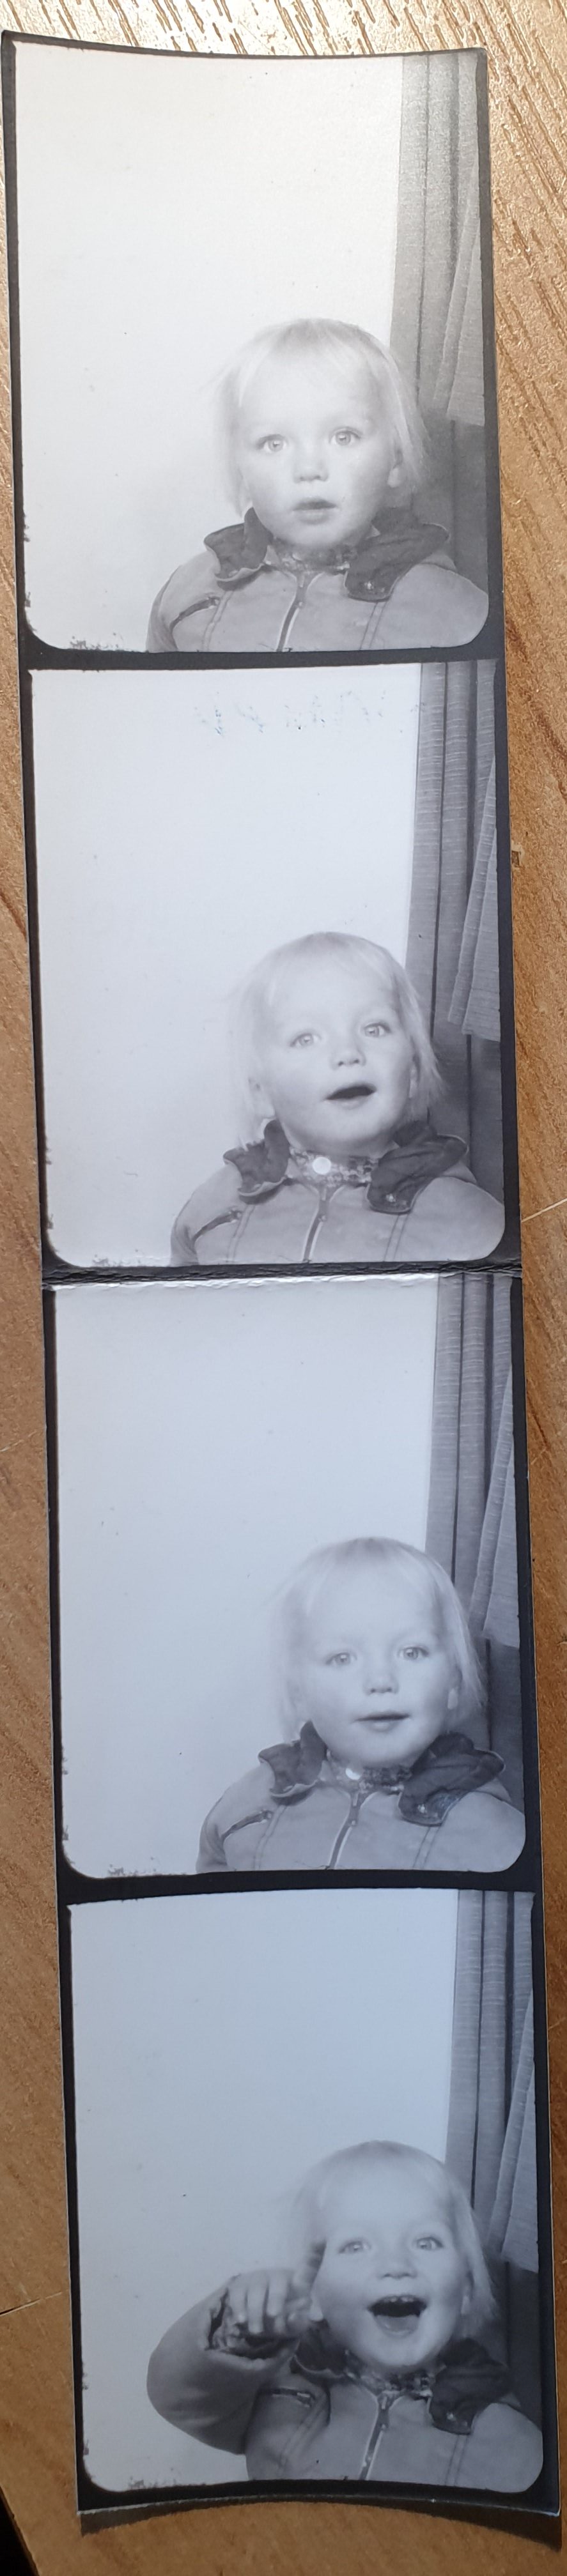 Dan, ~22 months old, in a photo booth